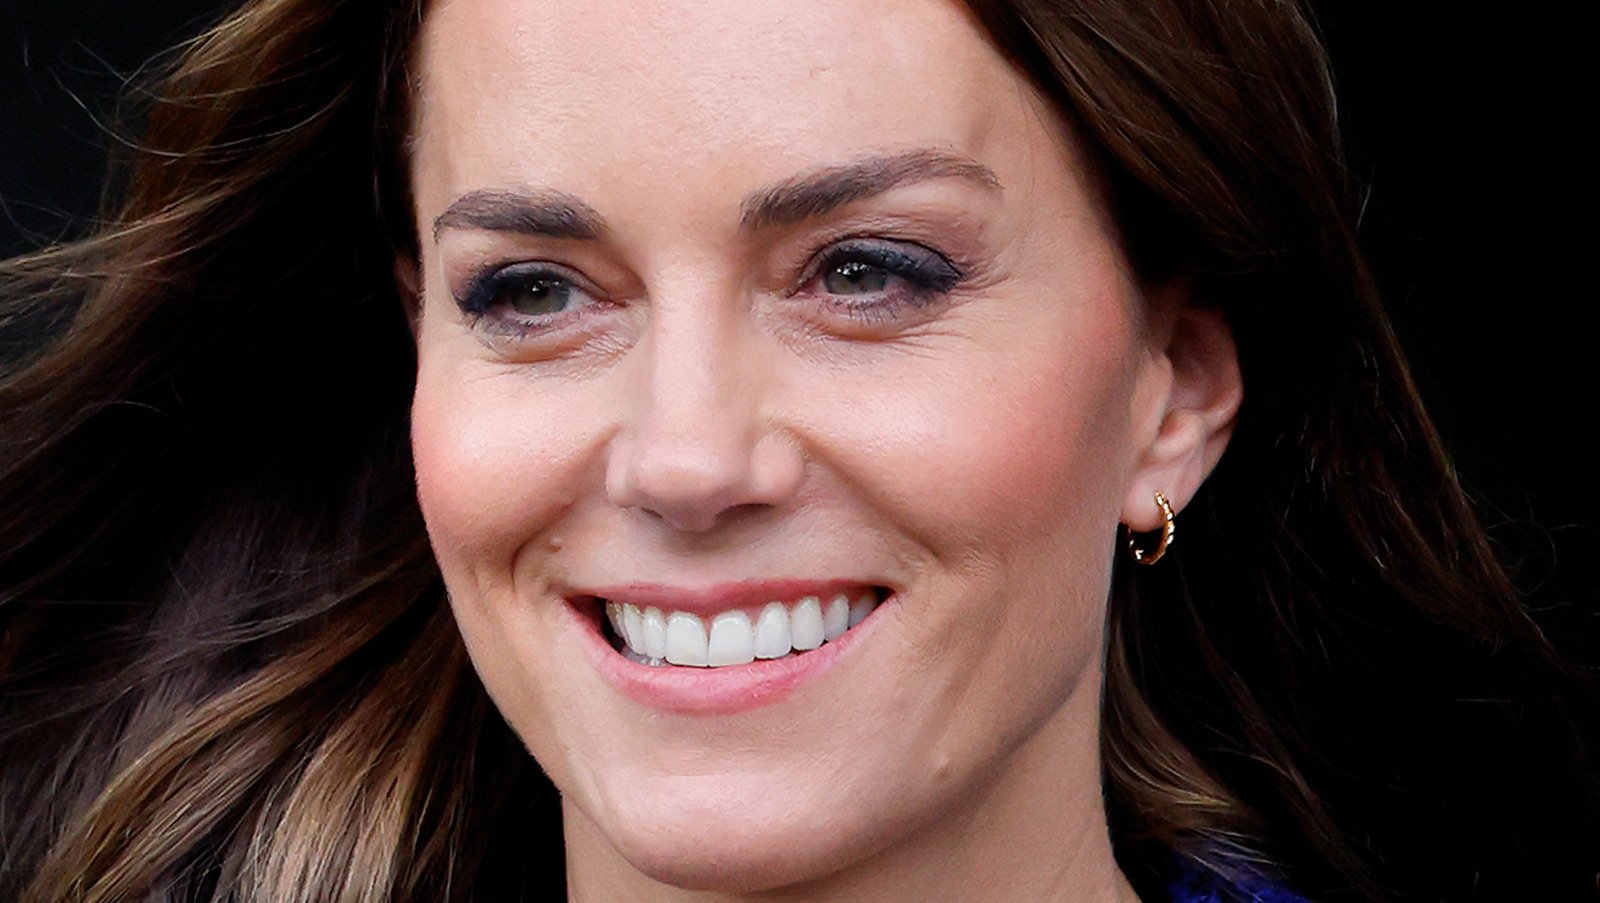 Here's Who Kate Middleton Was Dating When She Met Prince William